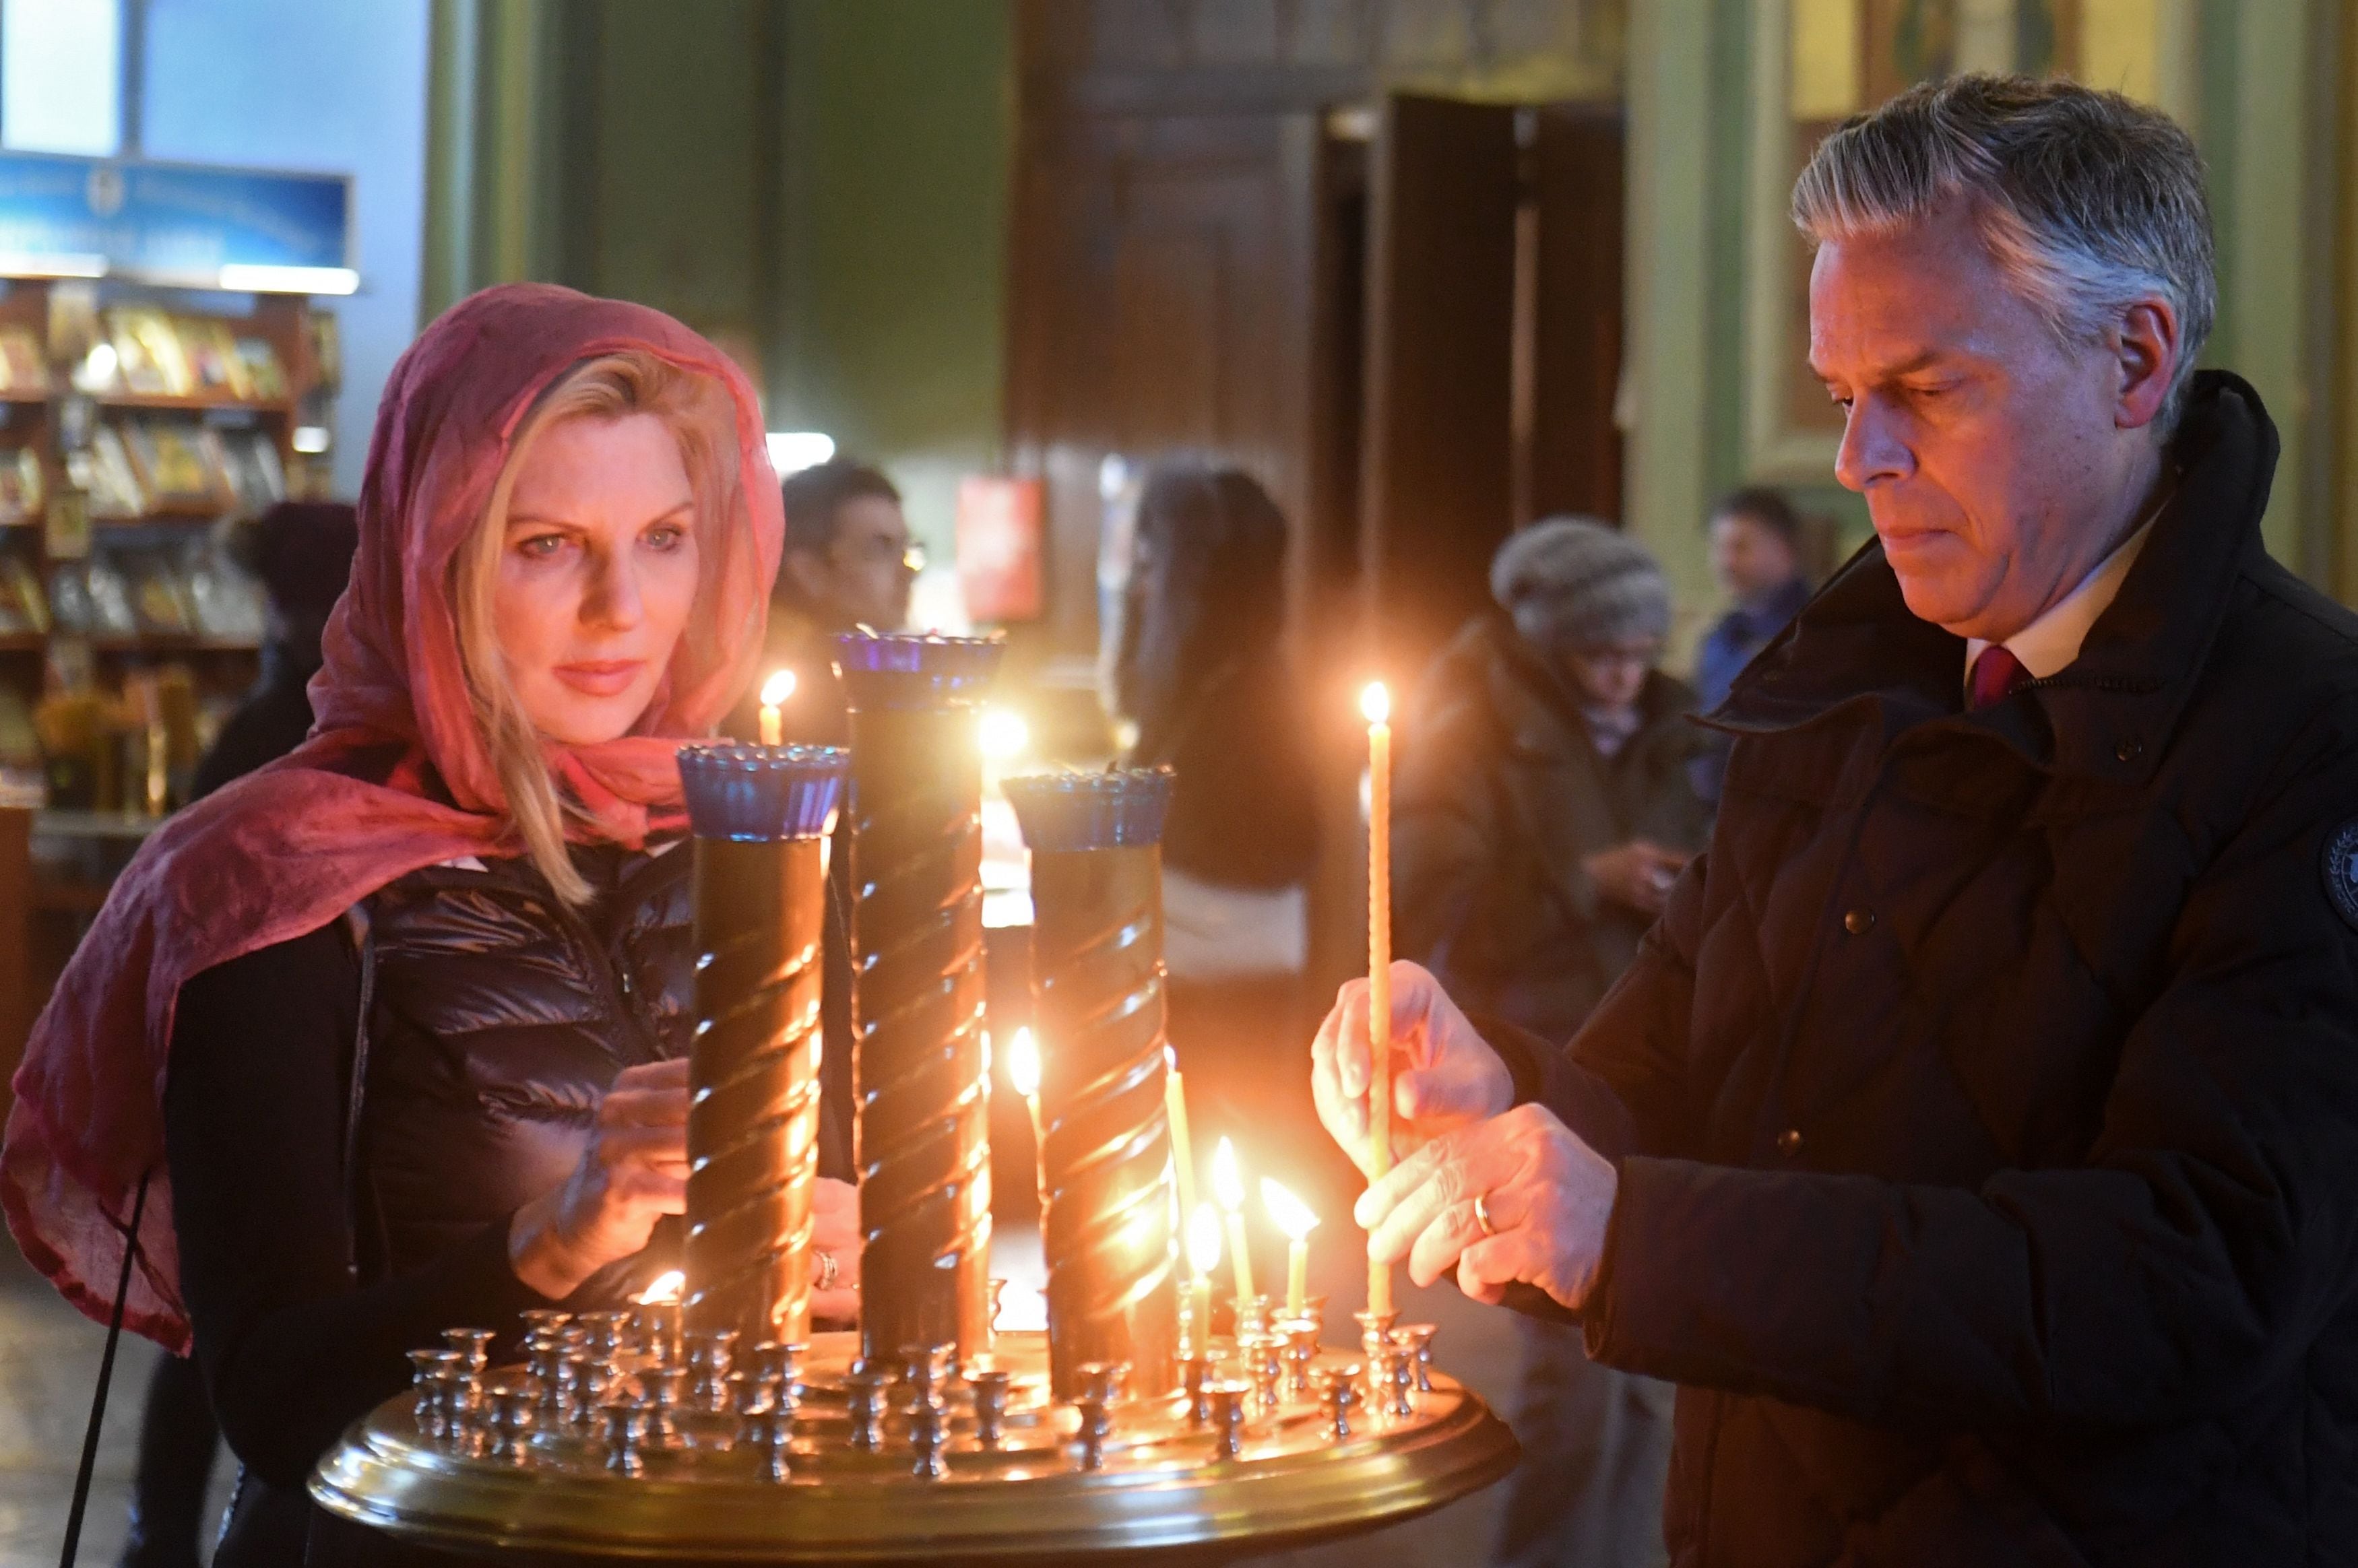 (Maksim Bogodvid | Sputnik via AP) U.S. Ambassador to Russia Jon Huntsman and his wife Mary Kaye Huntsman visit the Annunciation Cathedral as they tour the Kazan Kremlin on Feb. 26, 2018. The former ambassador was one of 500 Americans banned from traveling to Russia on Friday.